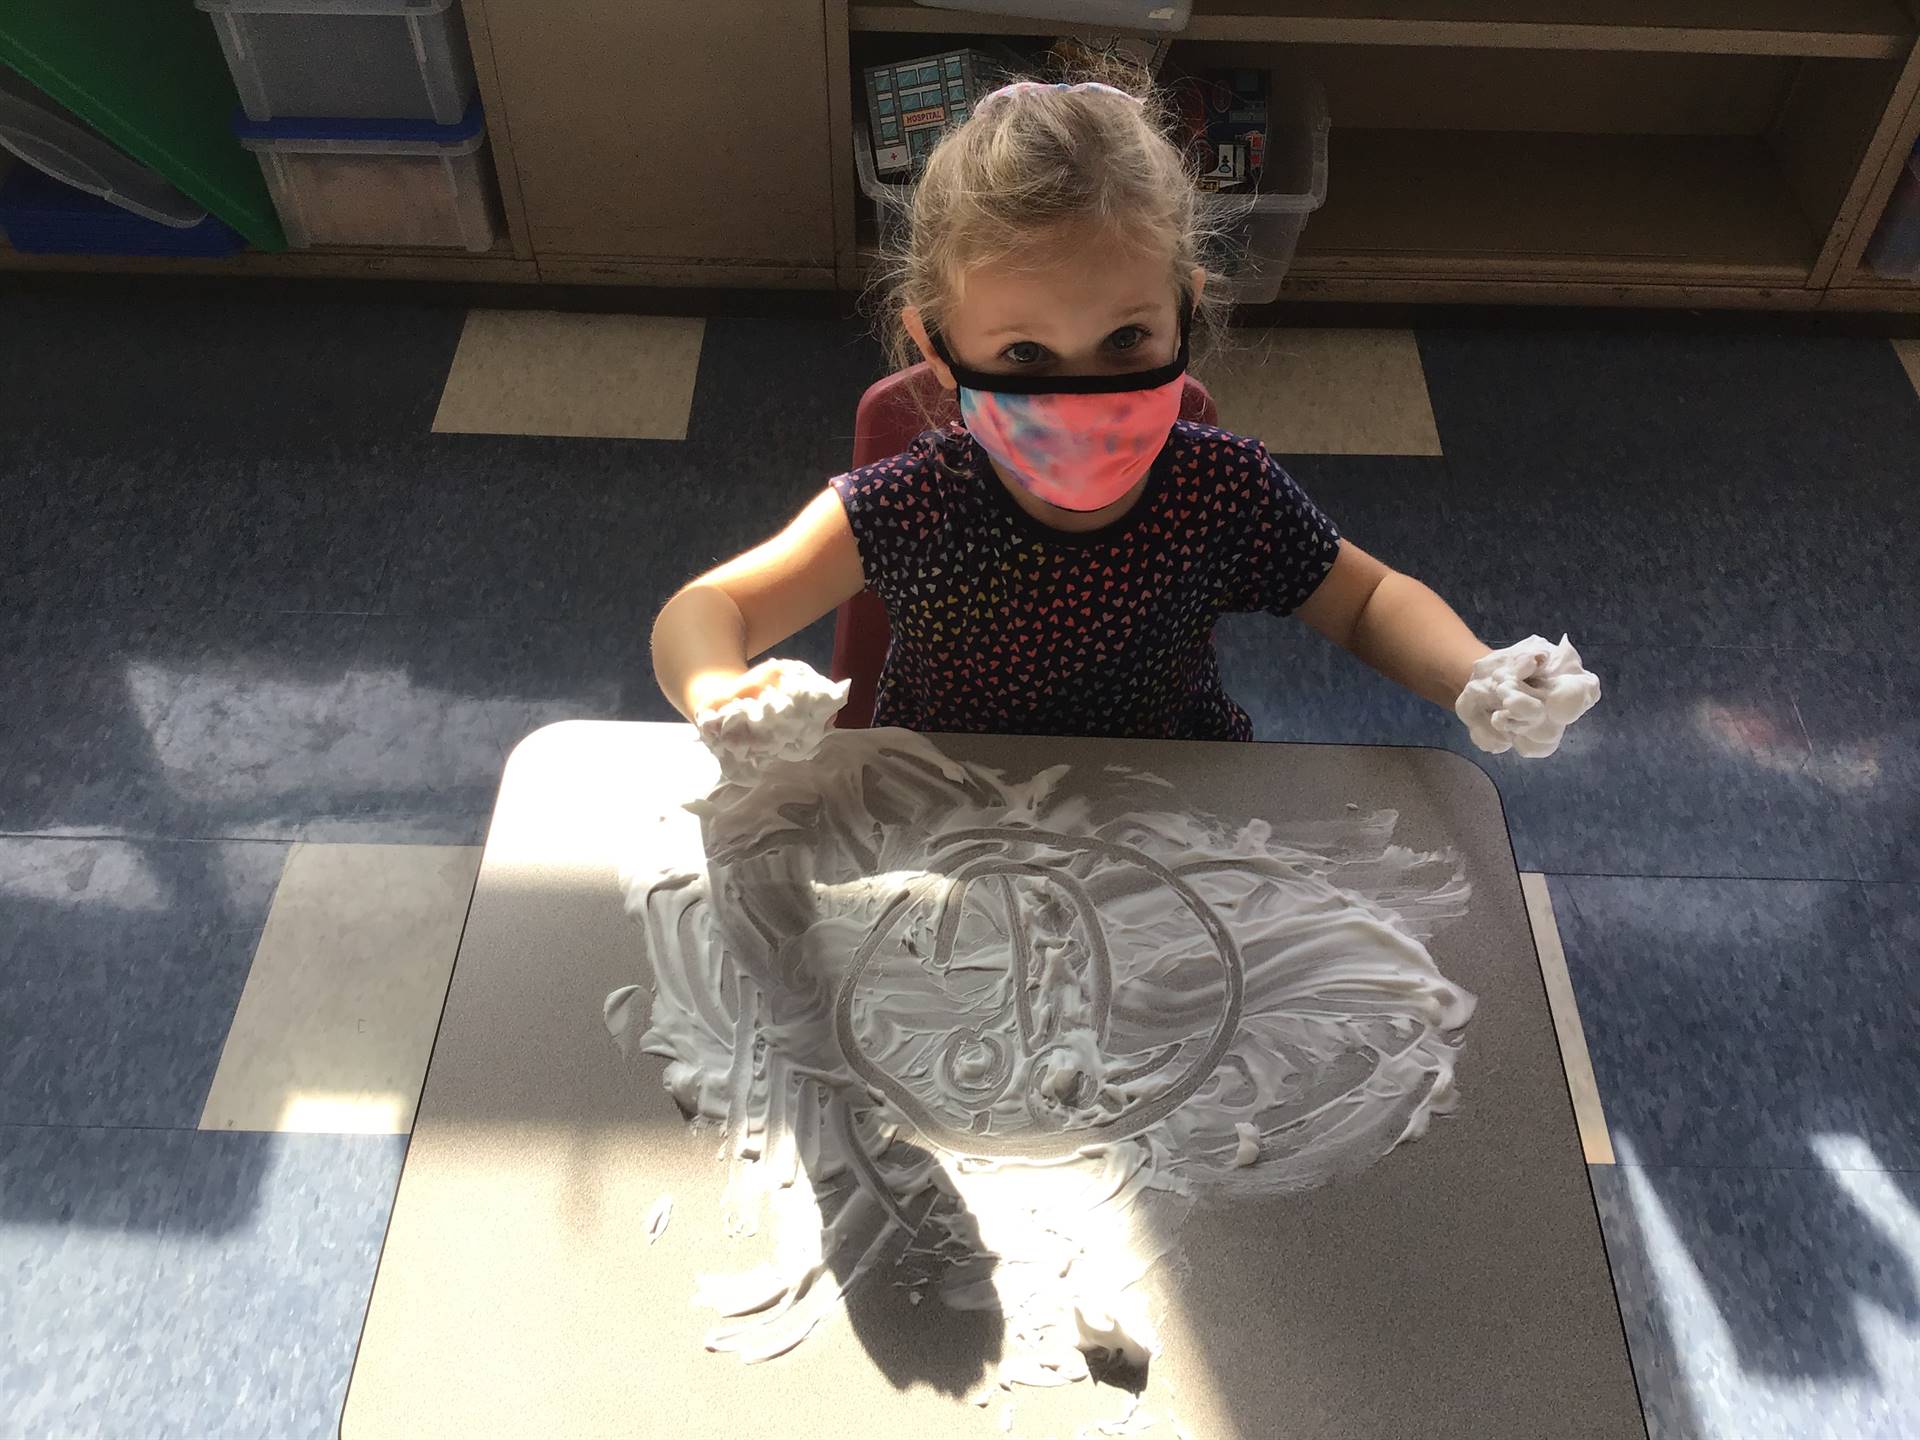 A student draws a scared face in shaving cream.